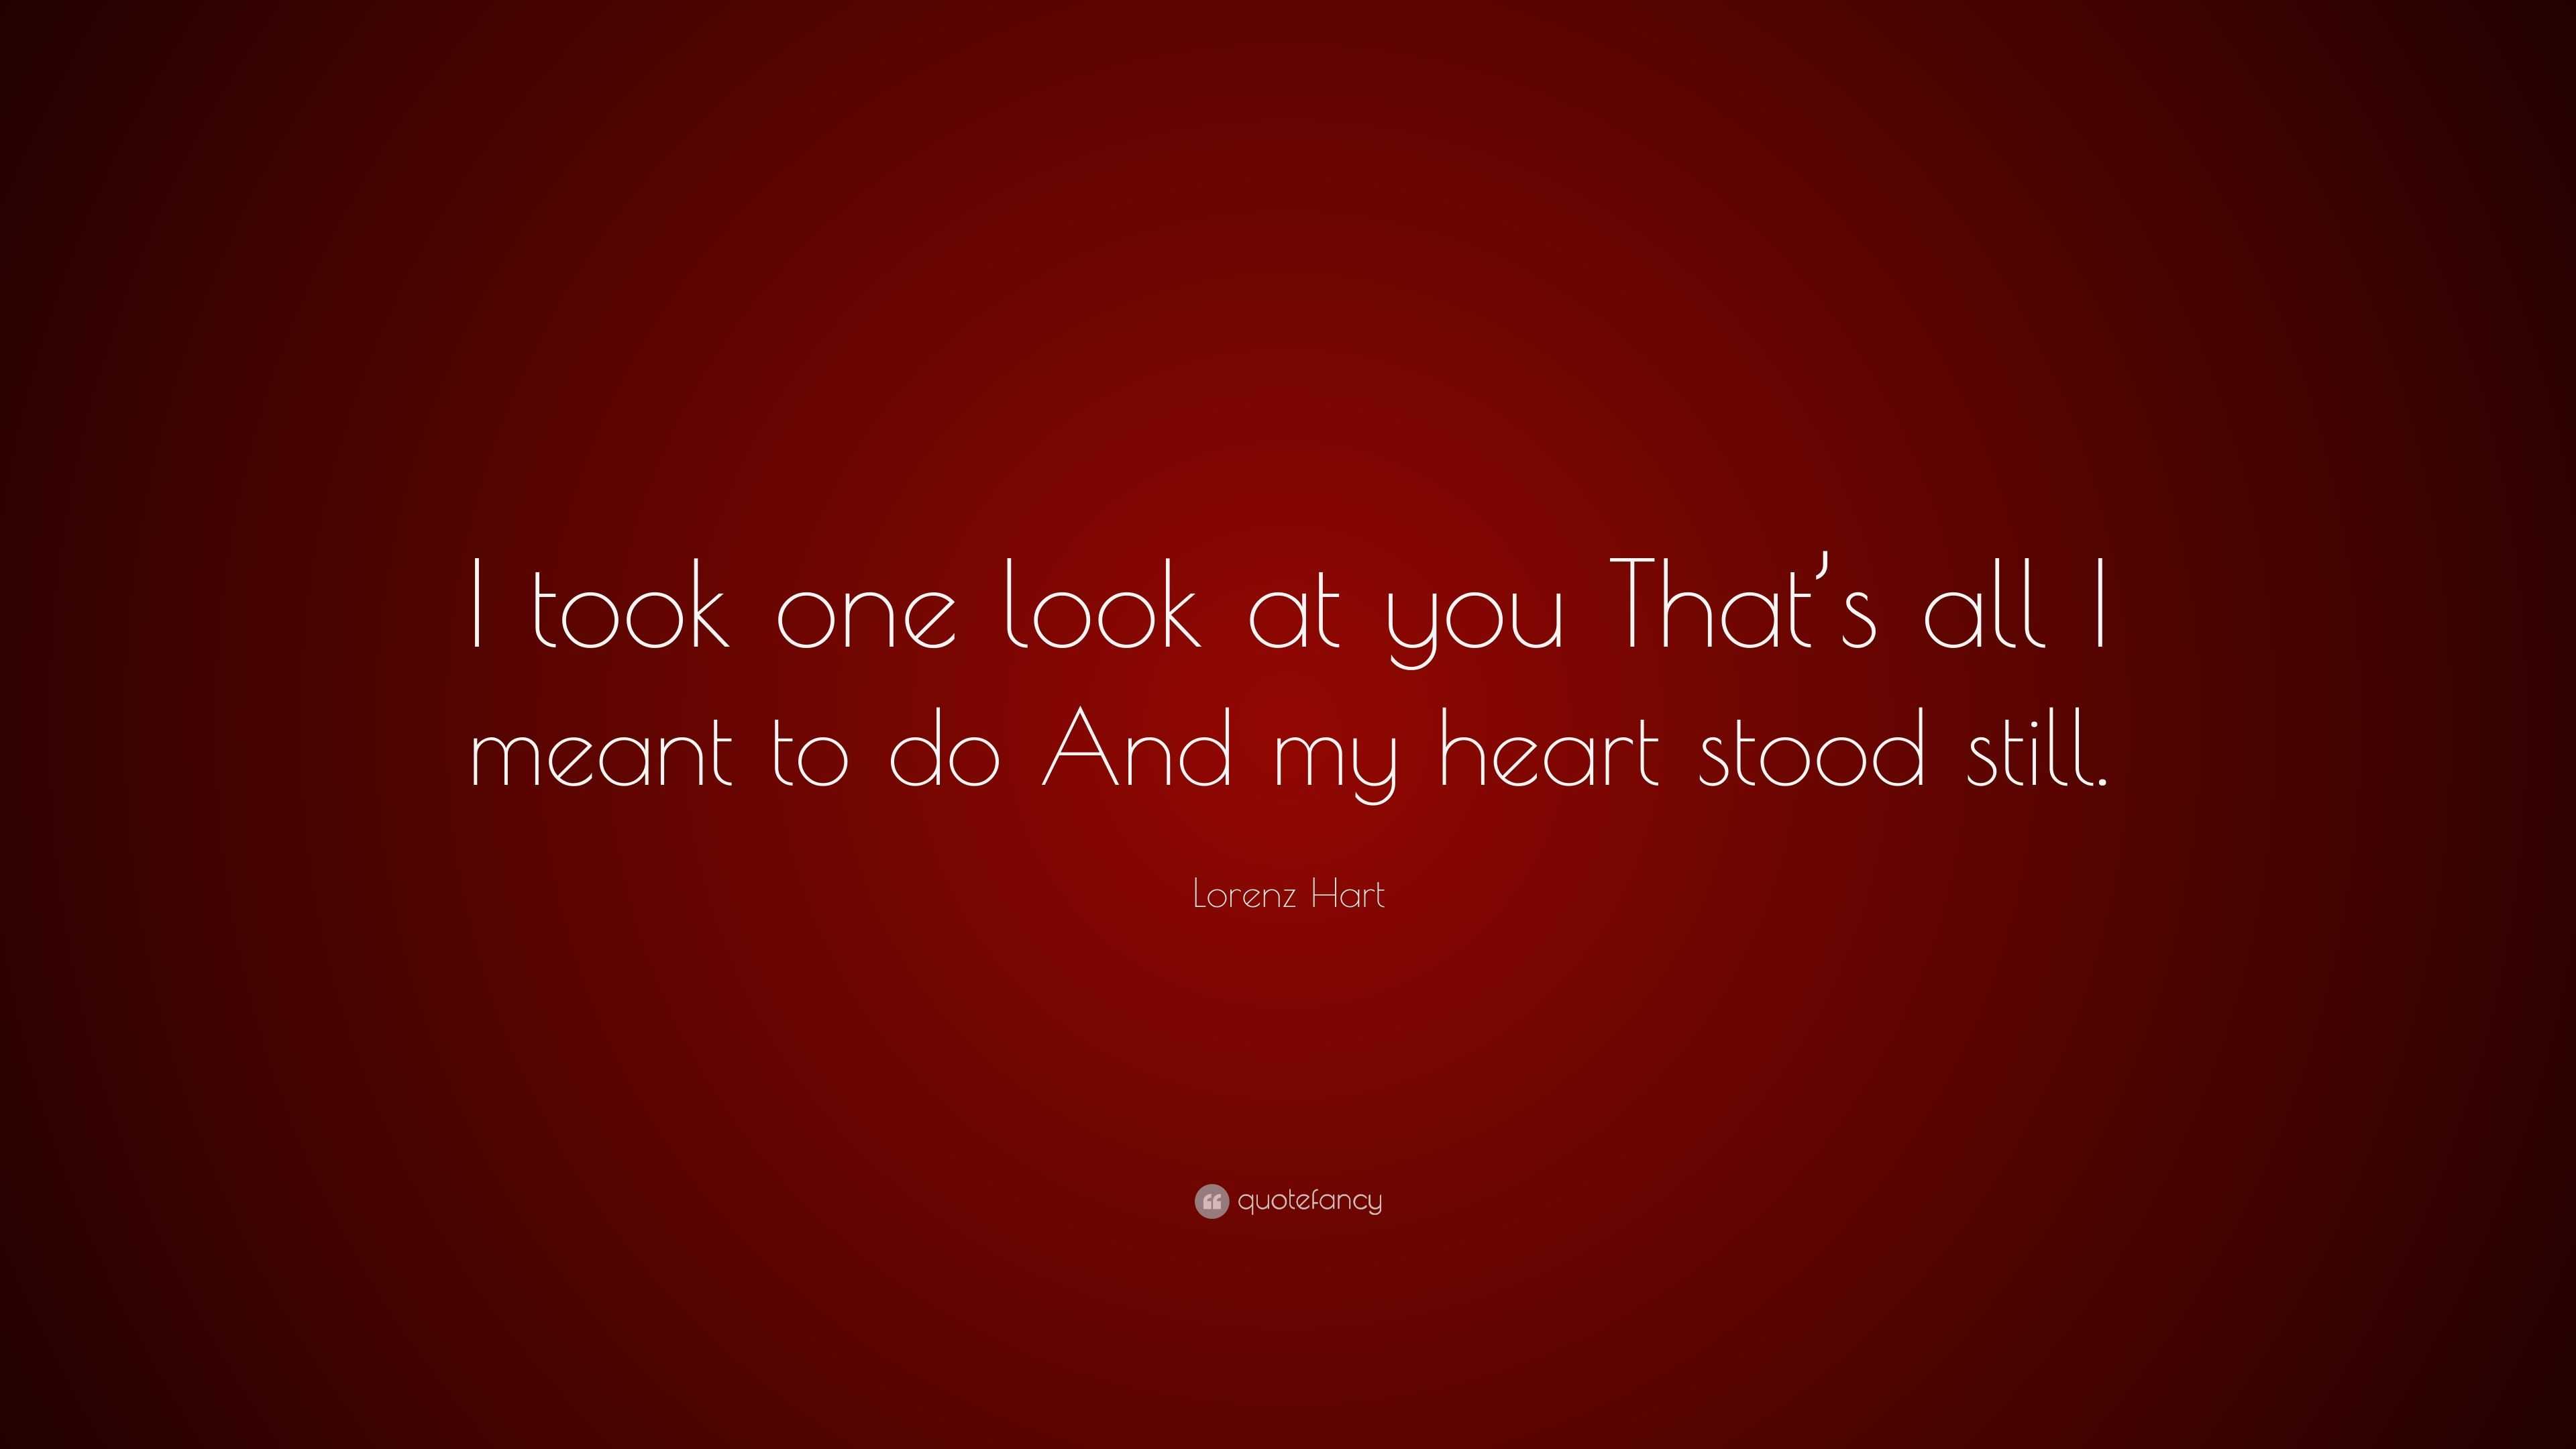 Lorenz Hart Quote: “I took one look at you That’s all I meant to do And ...